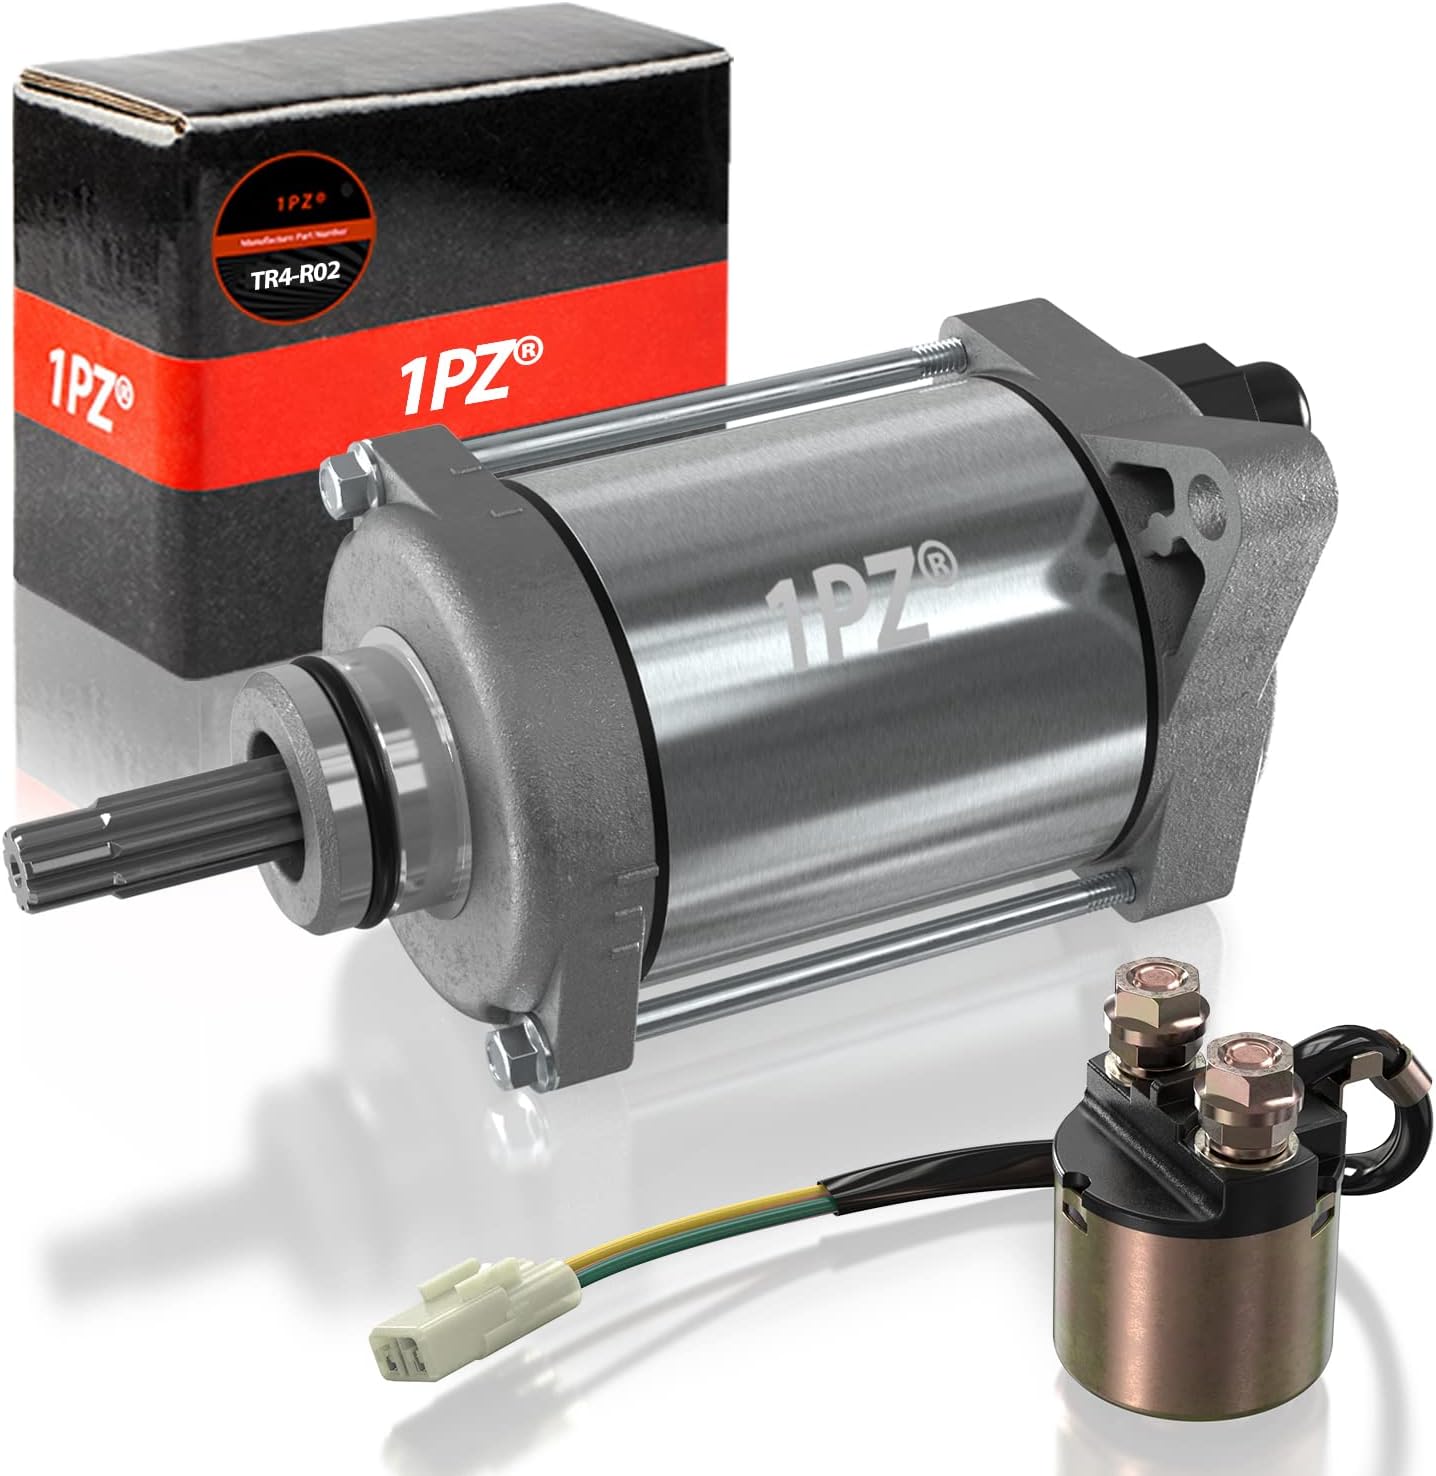 1PZ Starter Motor with Relay Solenoid Replacement for Honda Rancher 420 TRX420 FE FM TE TM FA Foreman 500 TRX500 FE FM Pioneer 500 SXS500M2 31200-HP5-601 35850-HP5-600